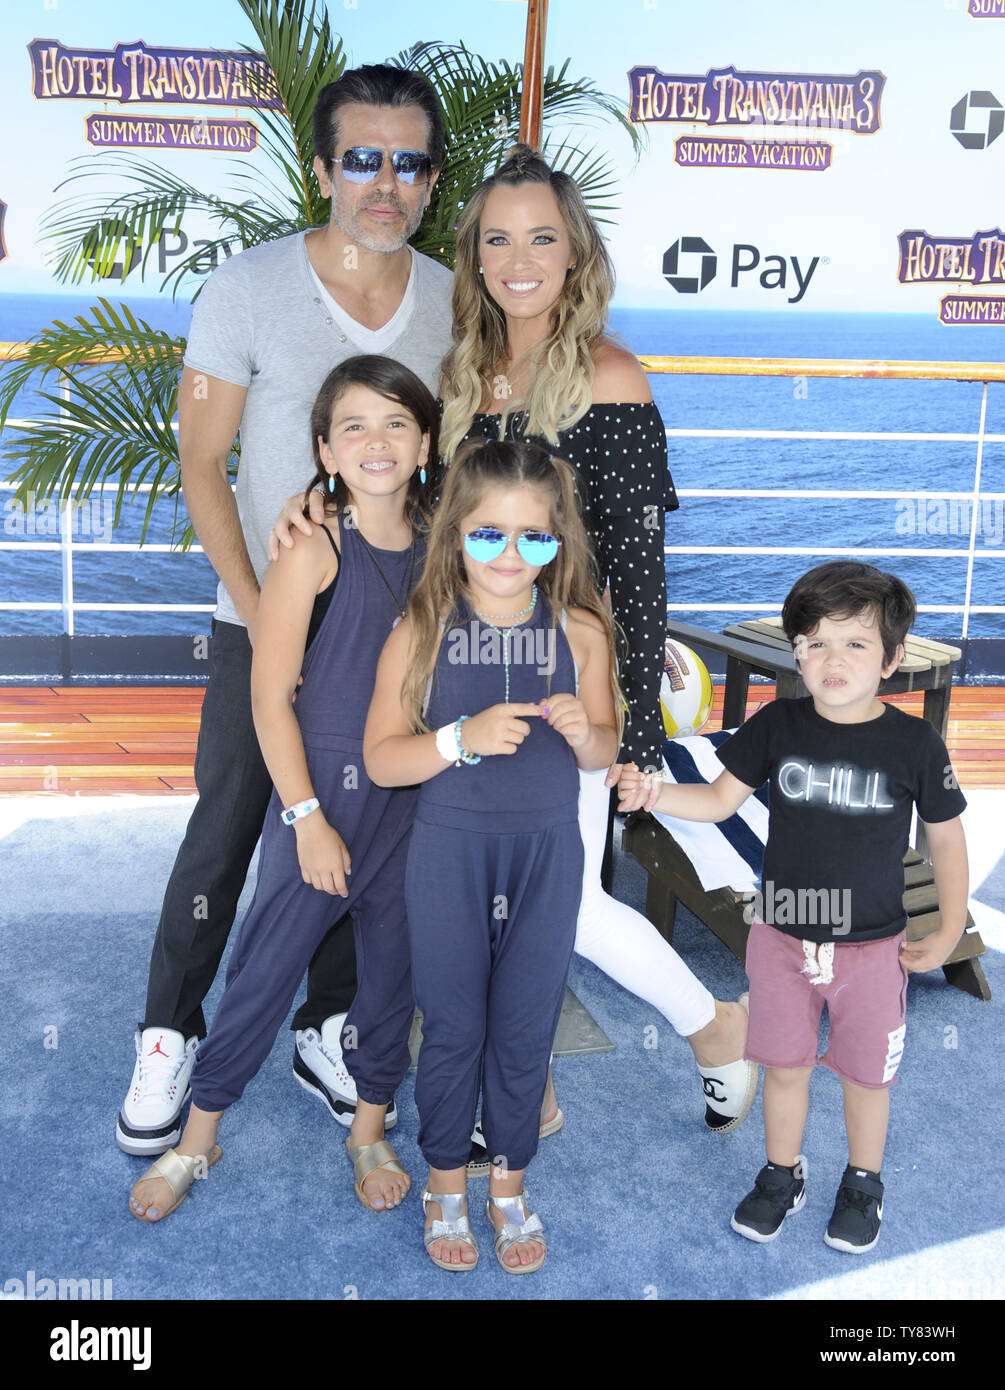 Guests Teddi Mellencamp Arroyave, husband Edwin Arroyave, son Cruz, daughters Slate and Isabella  attend the premiere of the animated motion picture comedy 'Hotel Transylvania 3: Summer Vacation' at the Regency Village Theatre in Los Angeles on June 30, 2018. The story follows Mavis as she surprises Dracula with a family voyage on a luxury Monster Cruise Ship so he can take a vacation from providing everyone else's vacation at the hotel. The rest of Drac's Pack cannot resist going along. But once they leave port, romance arises when Dracula meets the mysterious ship Captain, Ericka.   Photo by Stock Photo